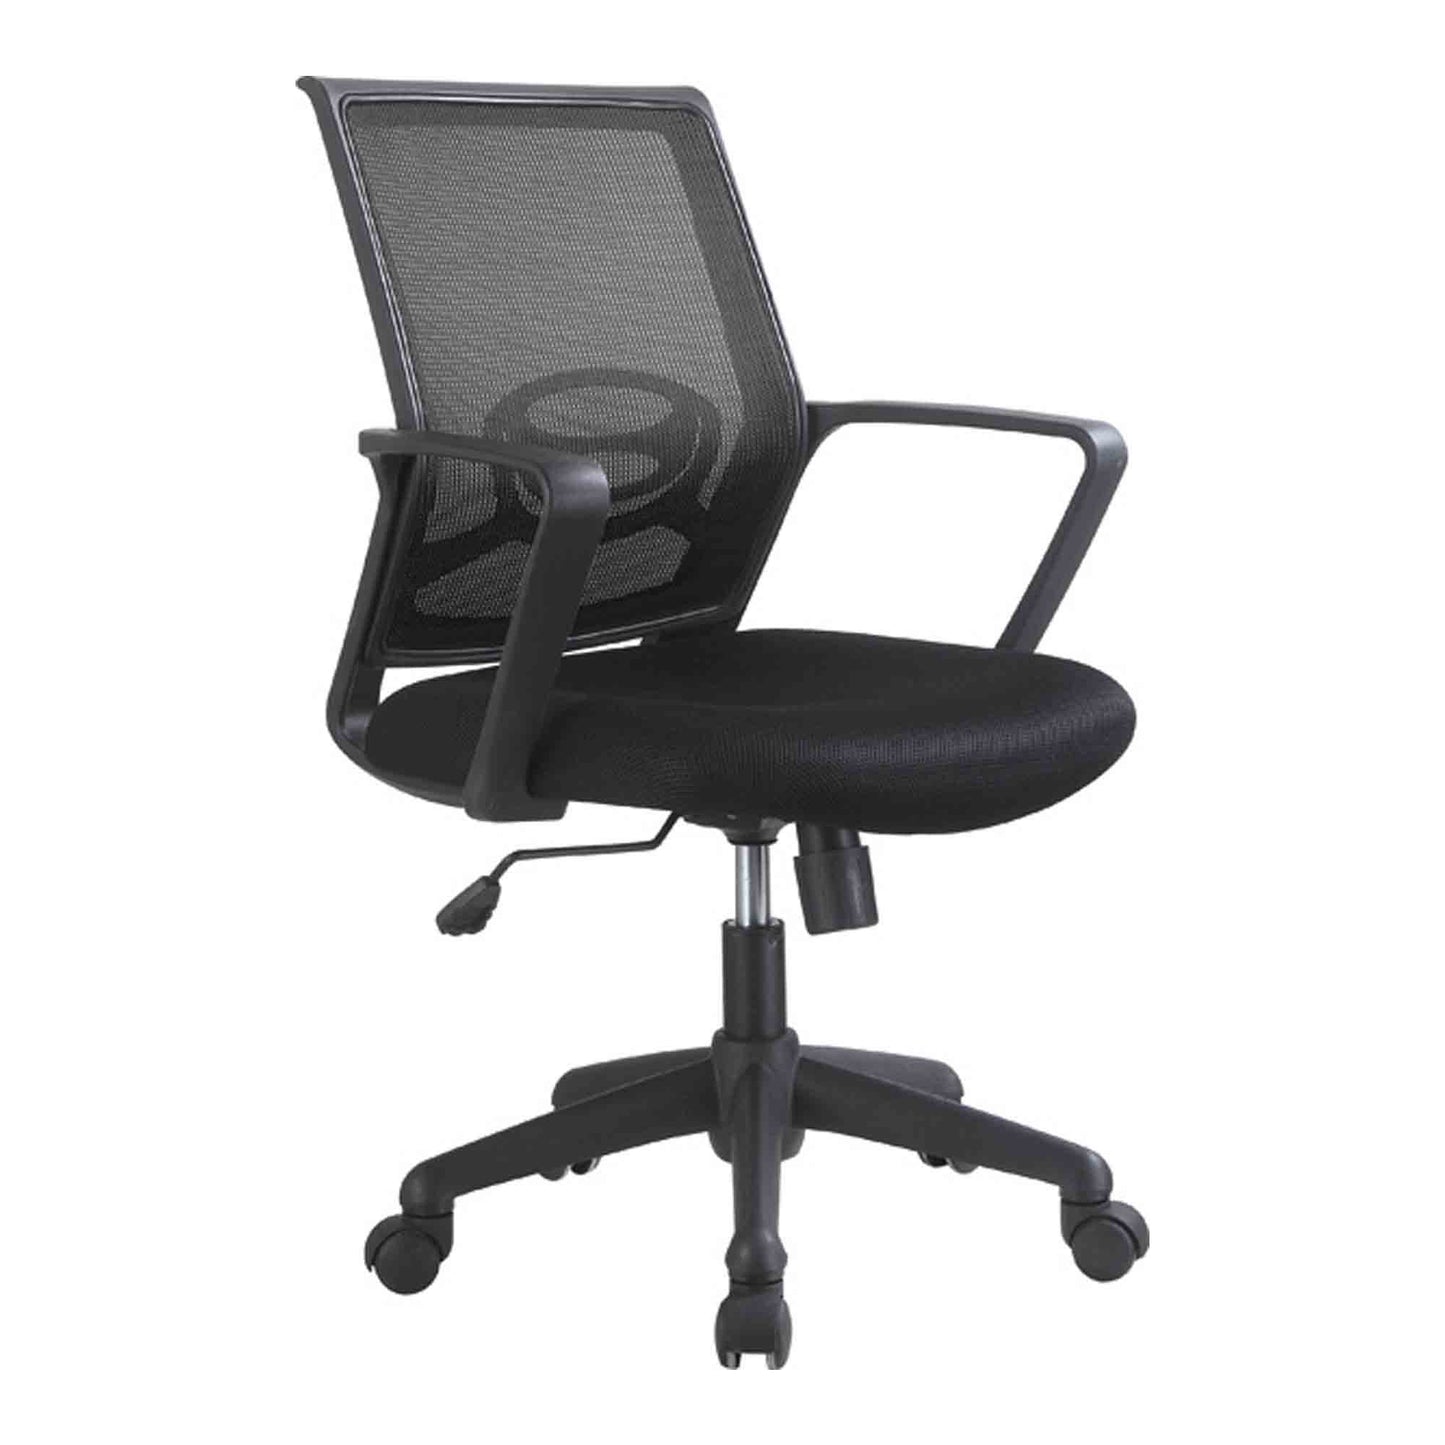 Office Chair - mch0023